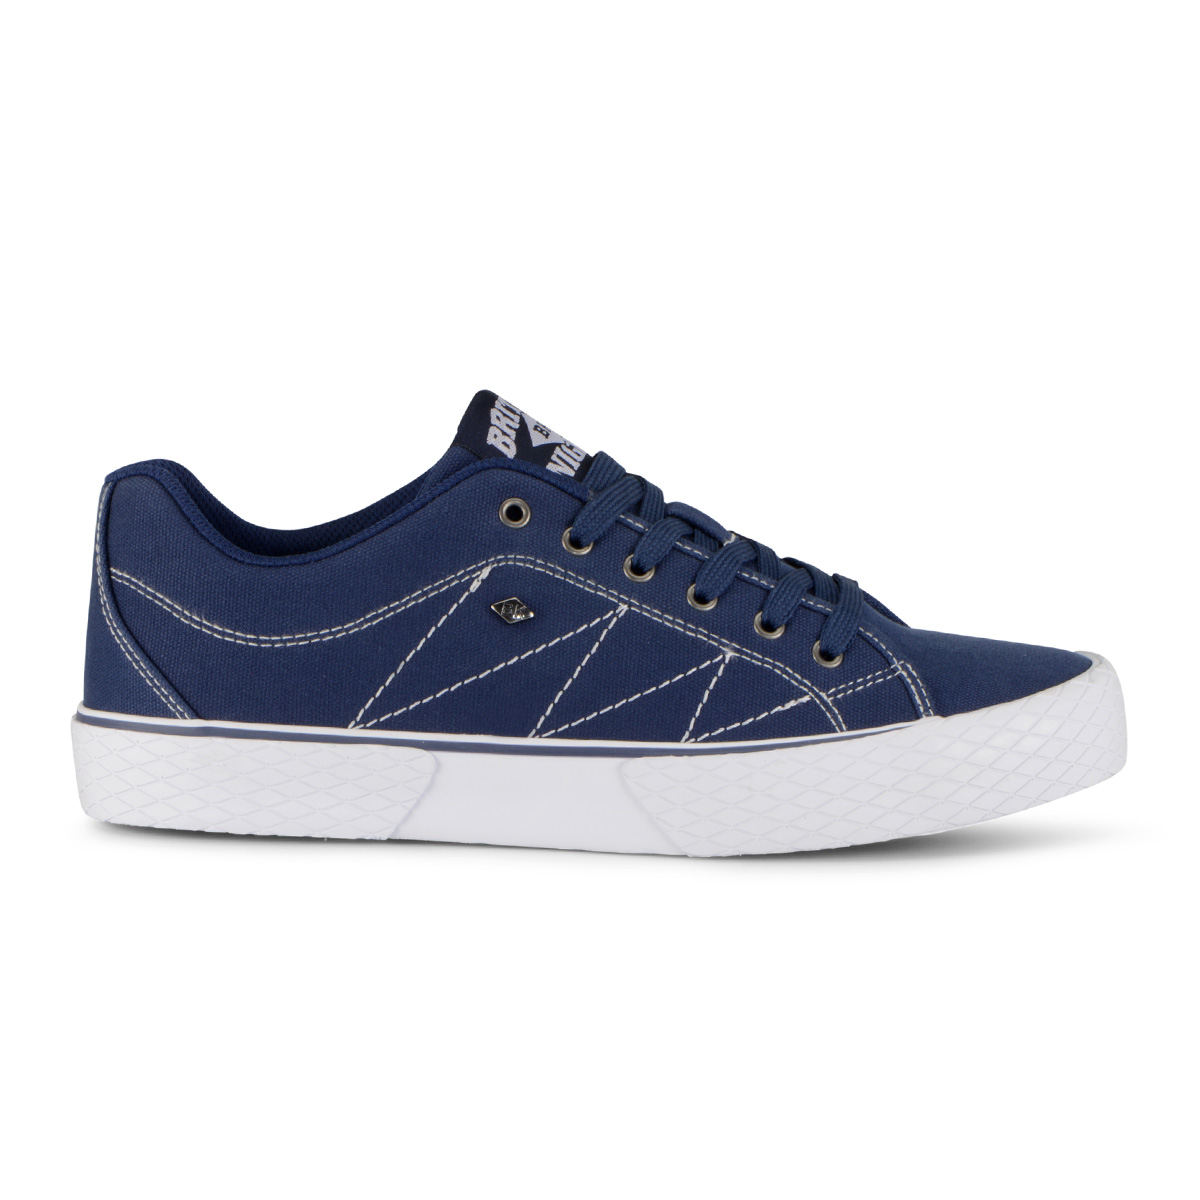 British Knights Men's Vulture 2 Canvas Sneaker Shoes - image 2 of 7